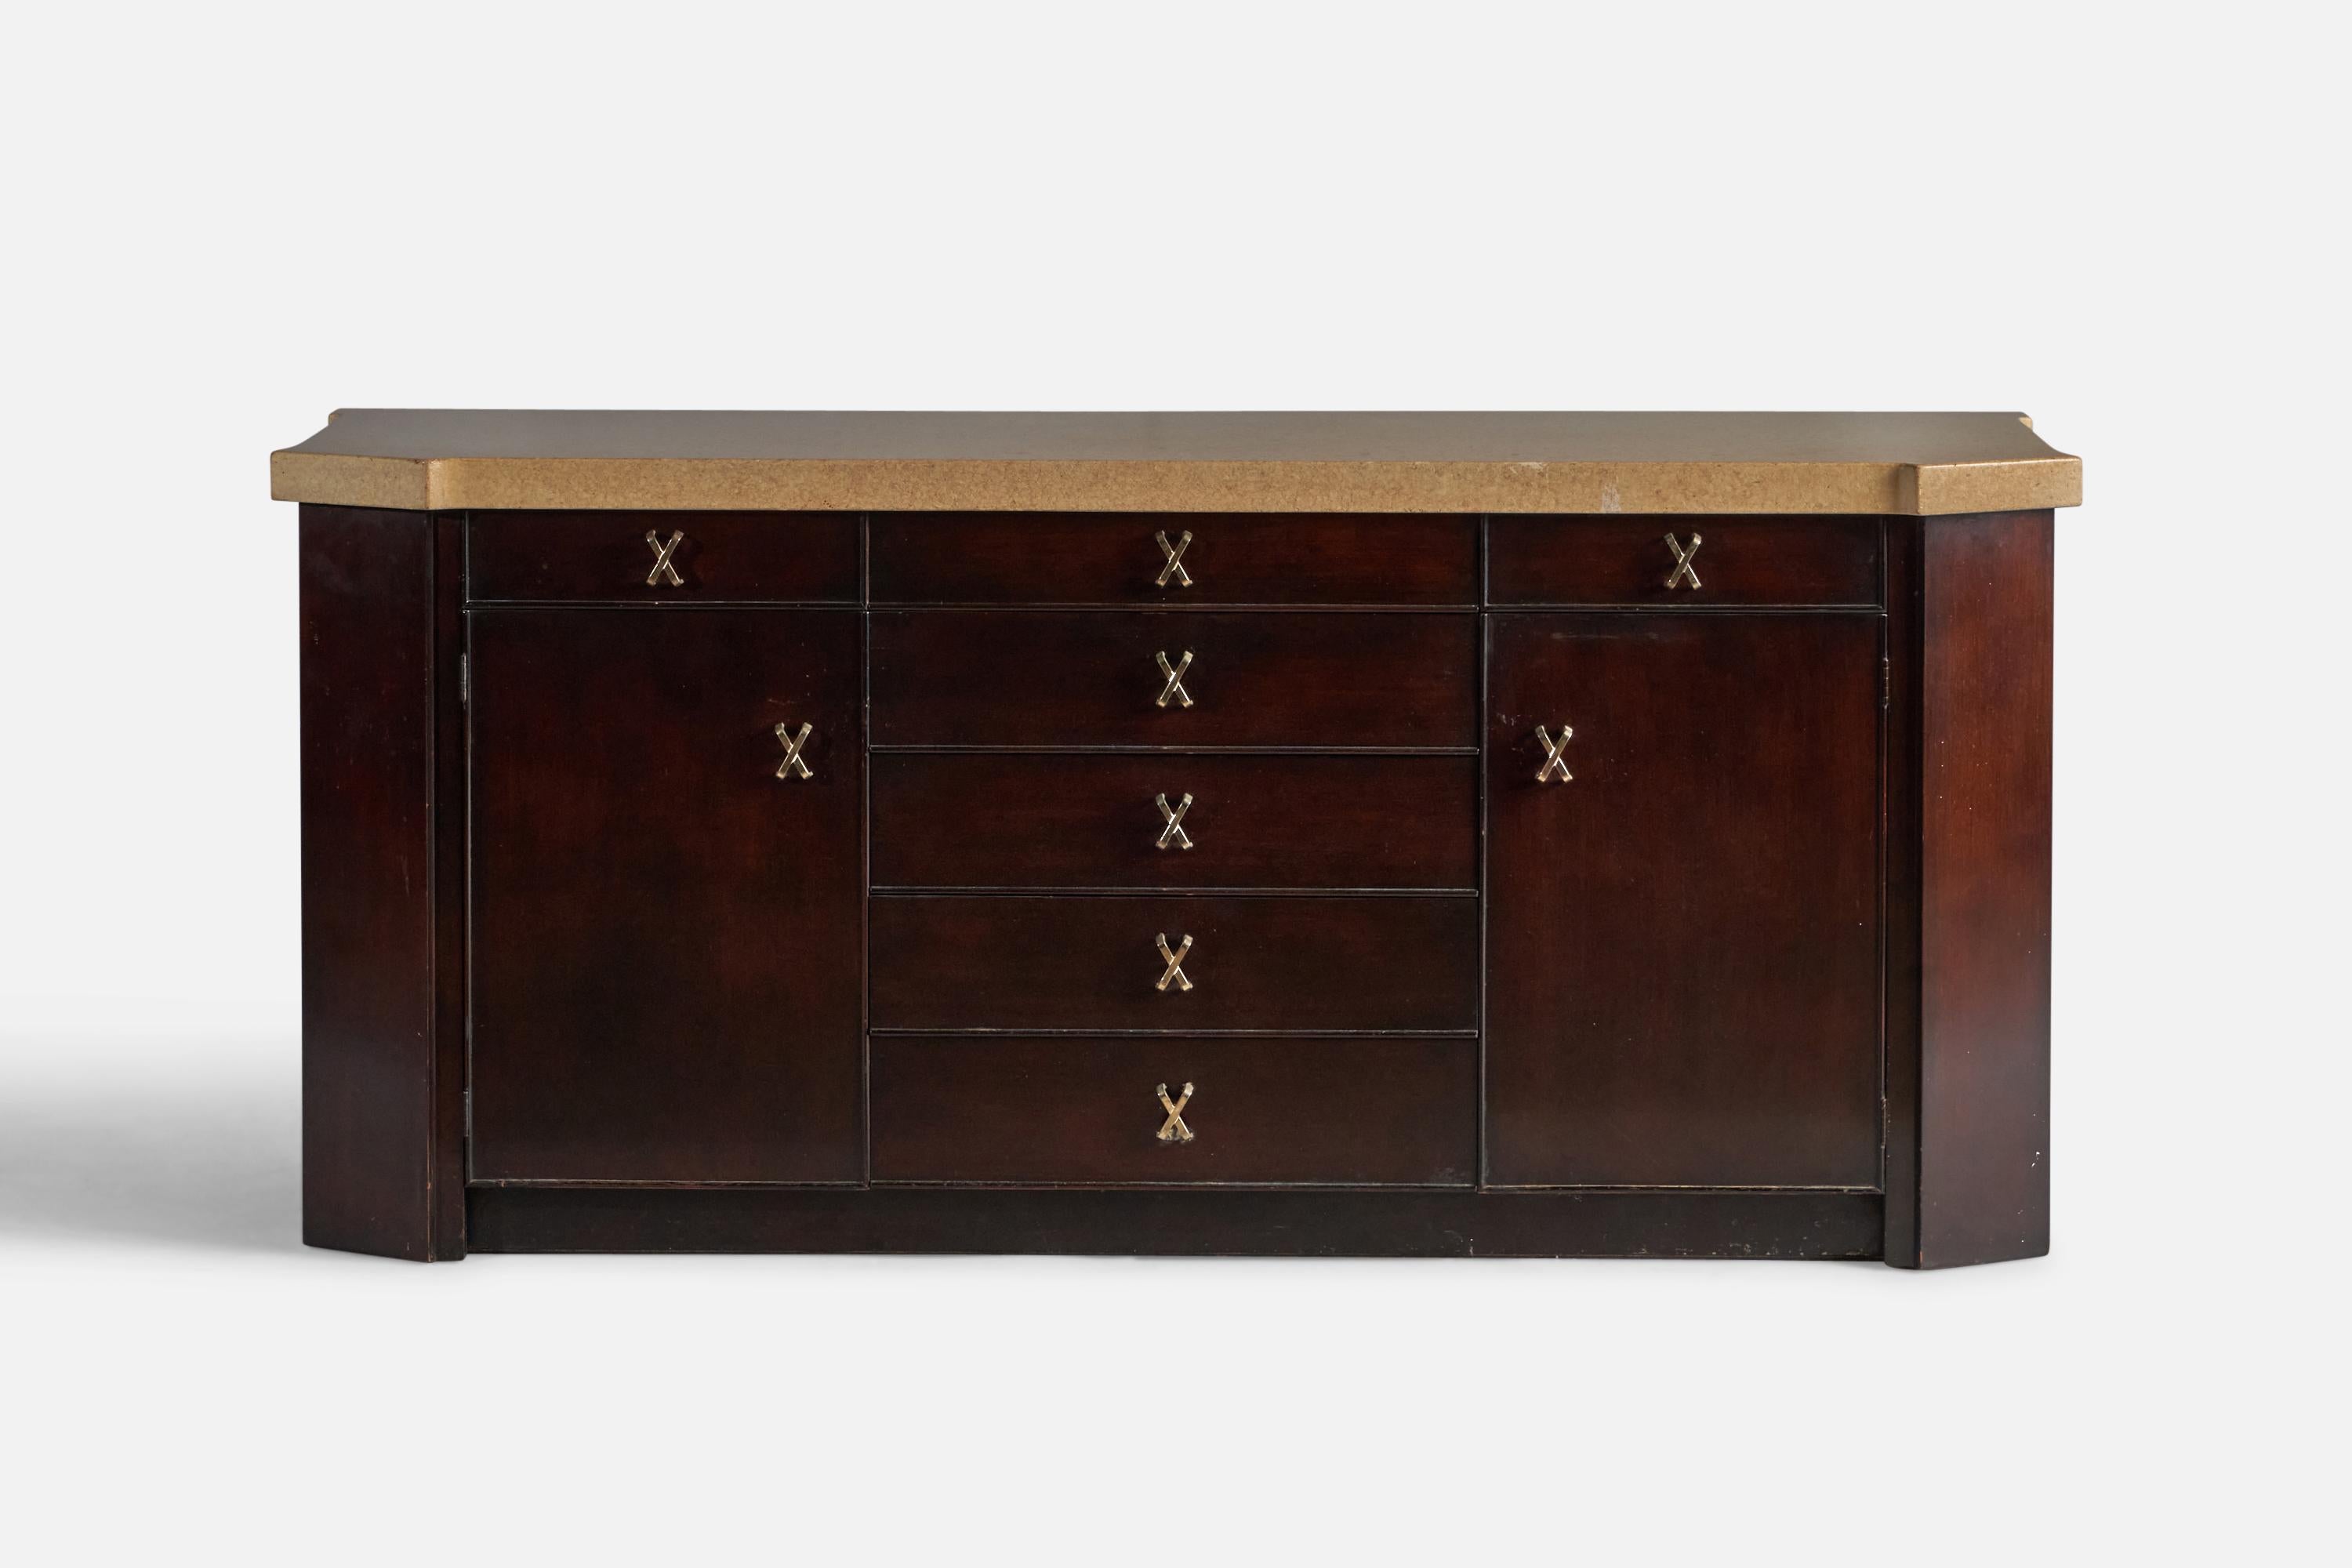 A stained mahogany, brass and beige-lacquered cork cabinet, designed by Paul Frankl and produced by Johnson Furniture Company, Grand Rapids Michigan, USA, 1950s.